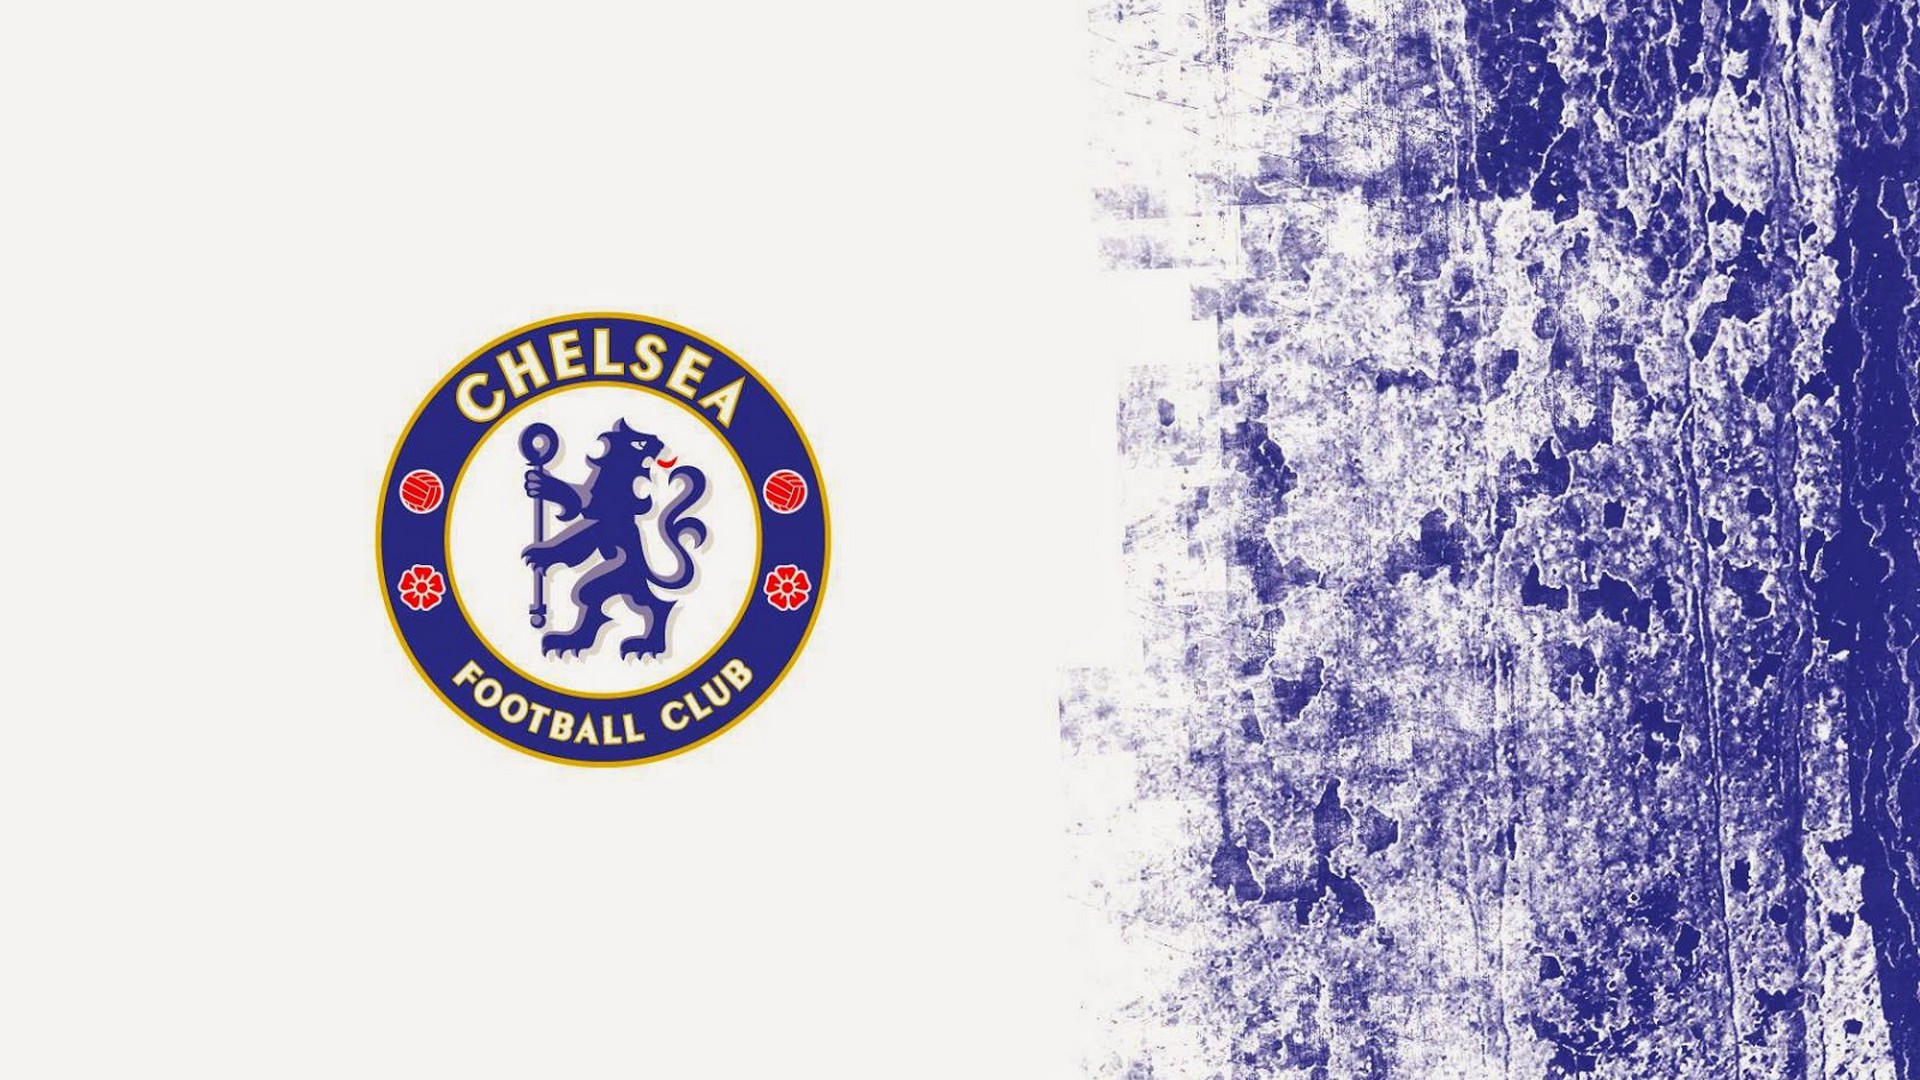 Chelsea London Wallpaper Hd With Resolution Pixel - Chelsea Desktop Wallpaper 2017 - HD Wallpaper 